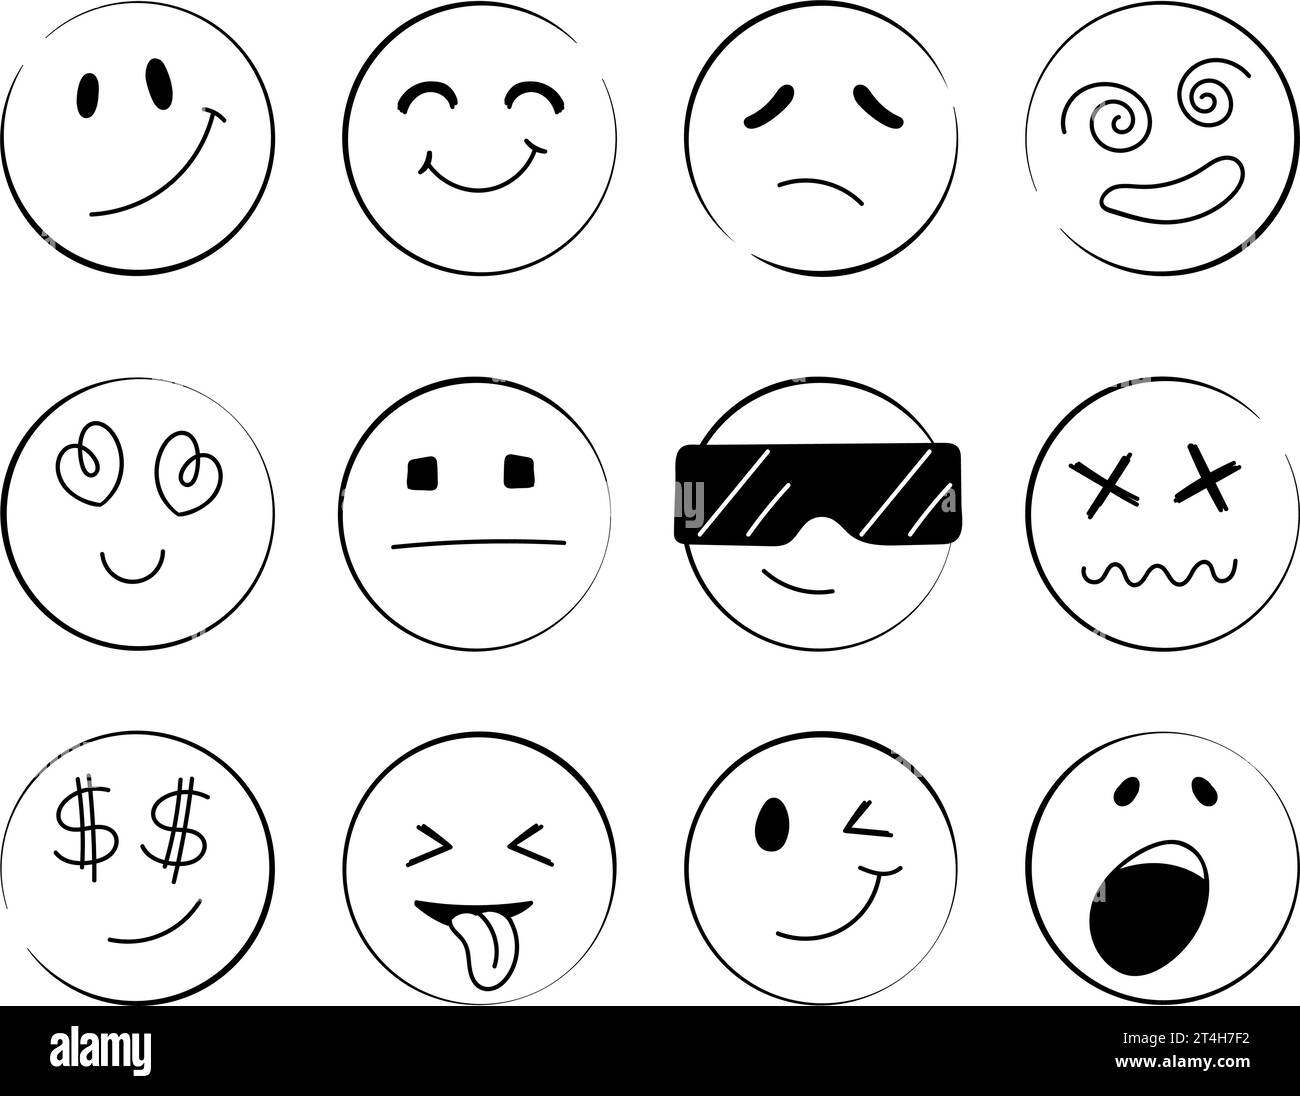 Doodle Emoji Face Icons Set. Round faces. Emoji with different emotional moods, happy, sad, smiling face. Comic book vector illustration. Stock Vector